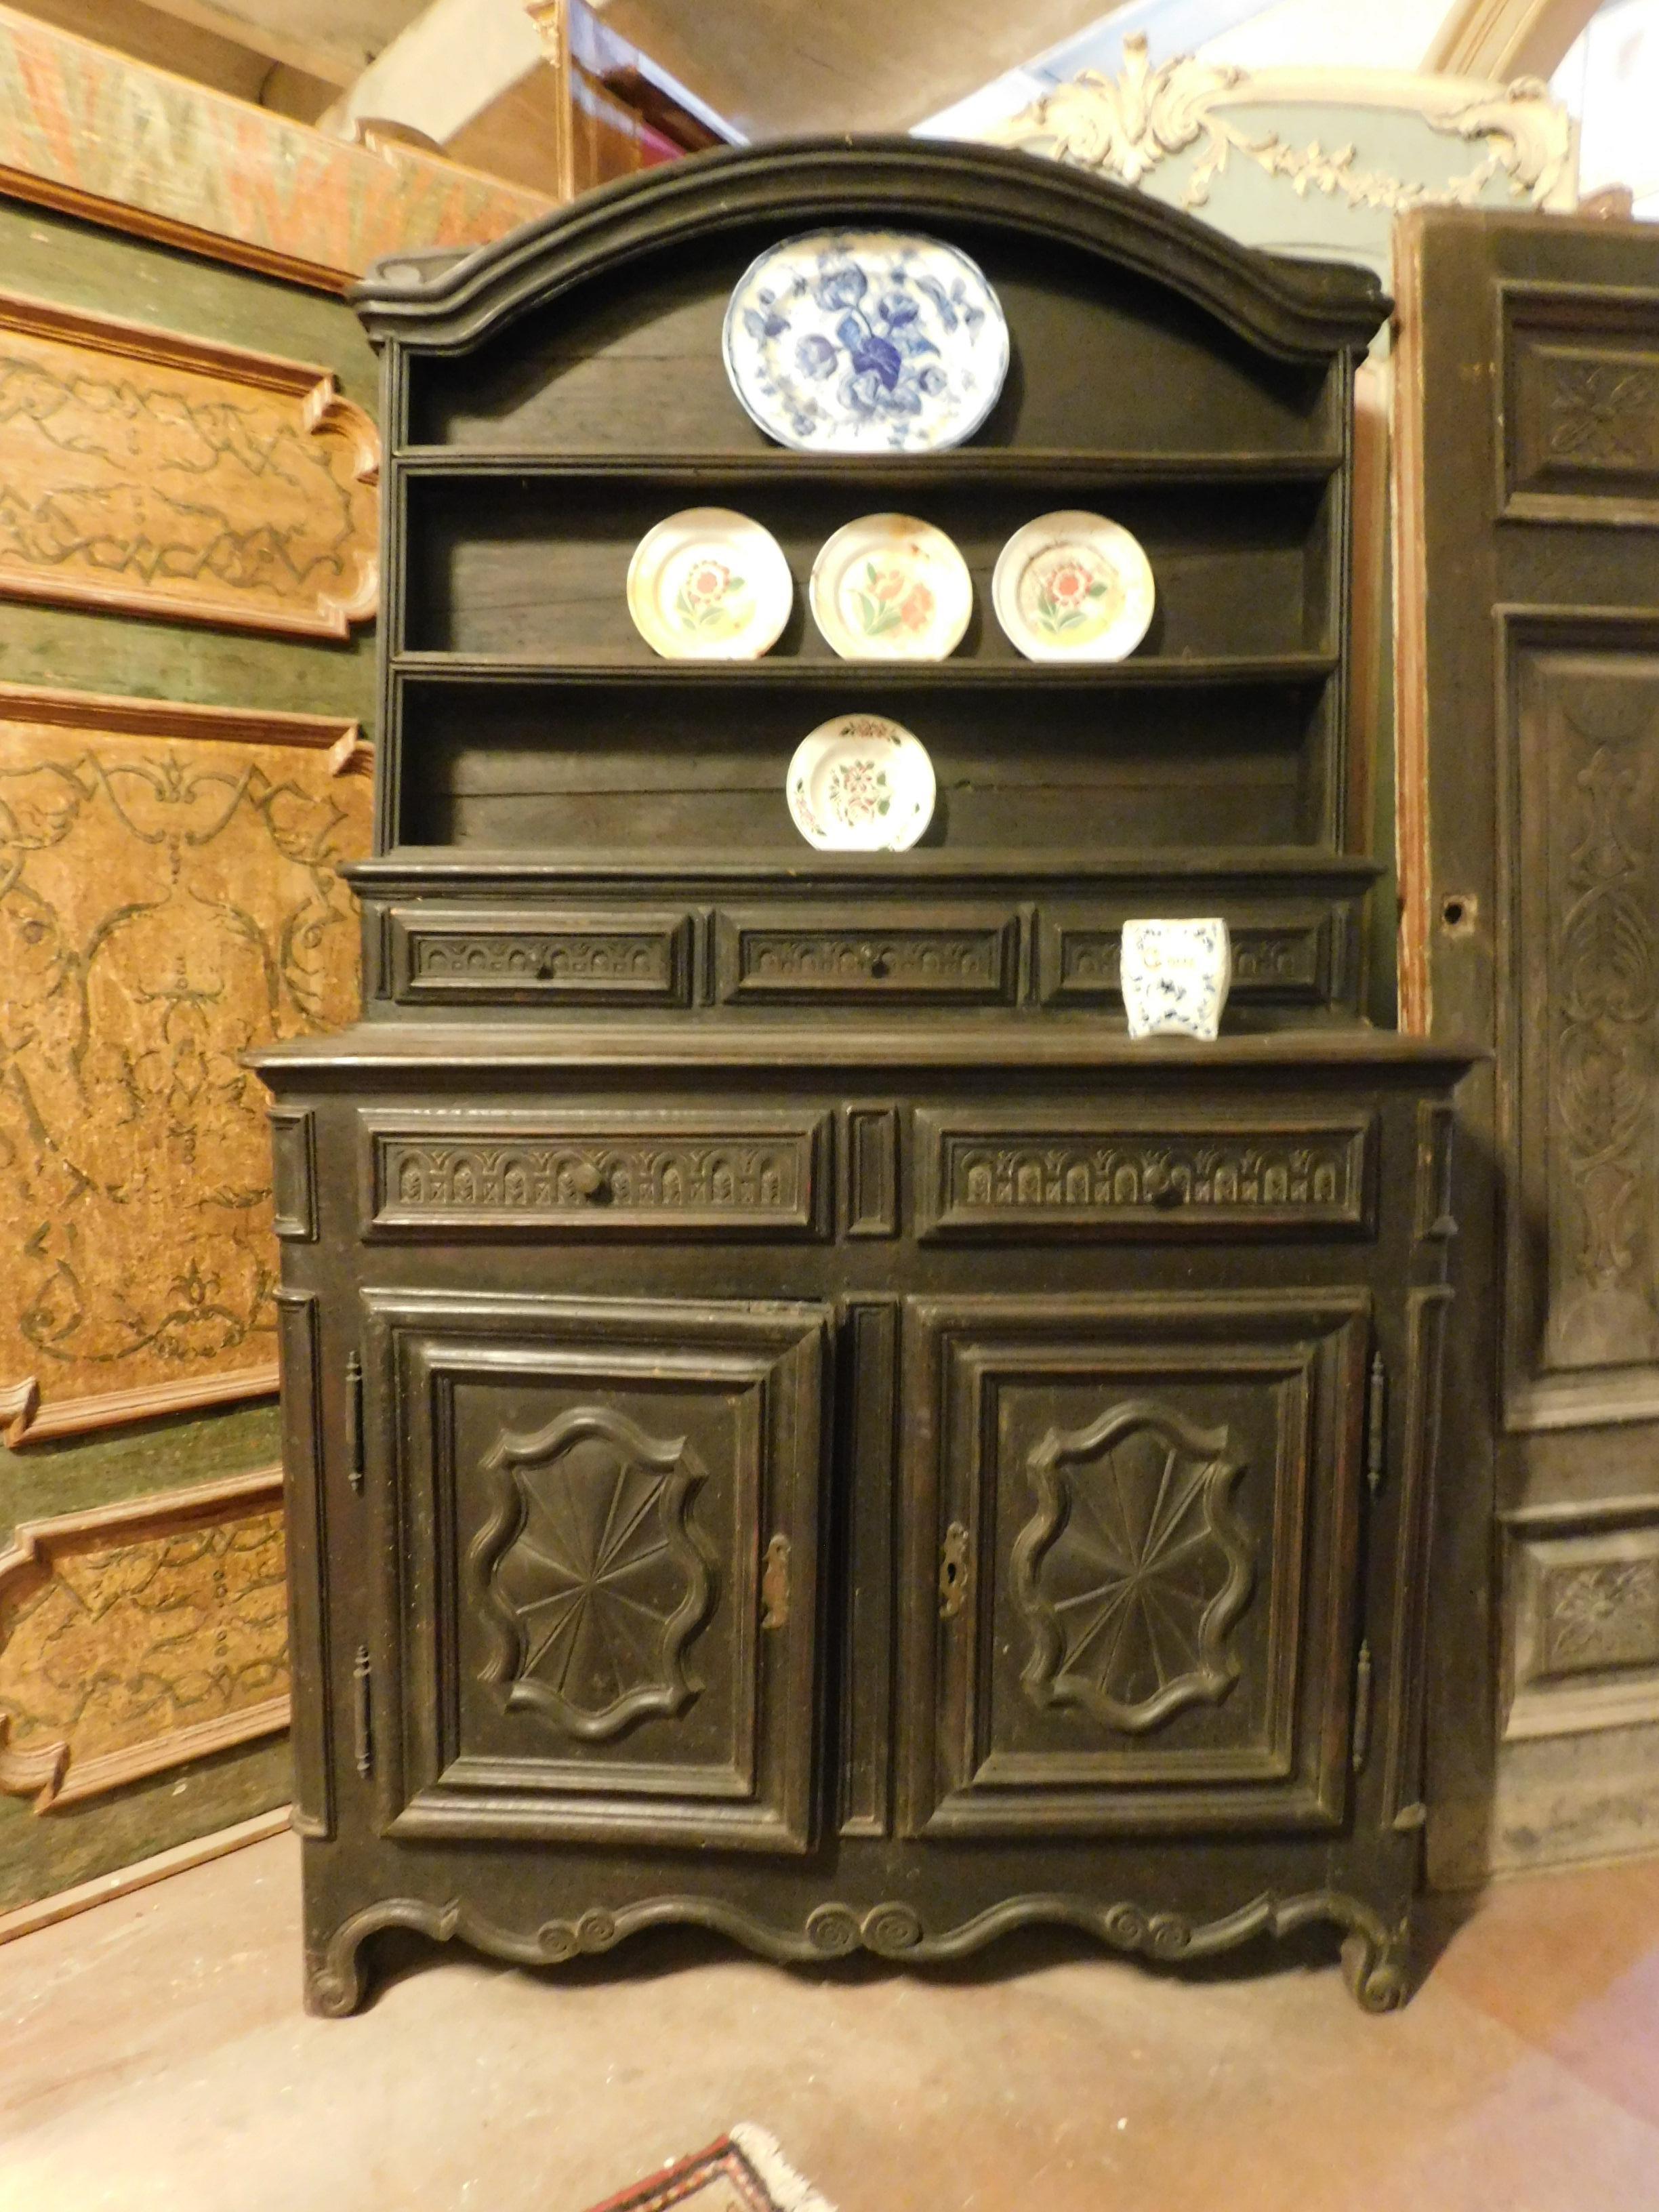 Antique kitchen cabinet, plate rack, in the middle of the Baroque period, hand-carved in precious walnut wood, has drawers and doors plus an open area, built in the 18th century in Italy (Piedmont origin).
Very beautiful and very rich in the